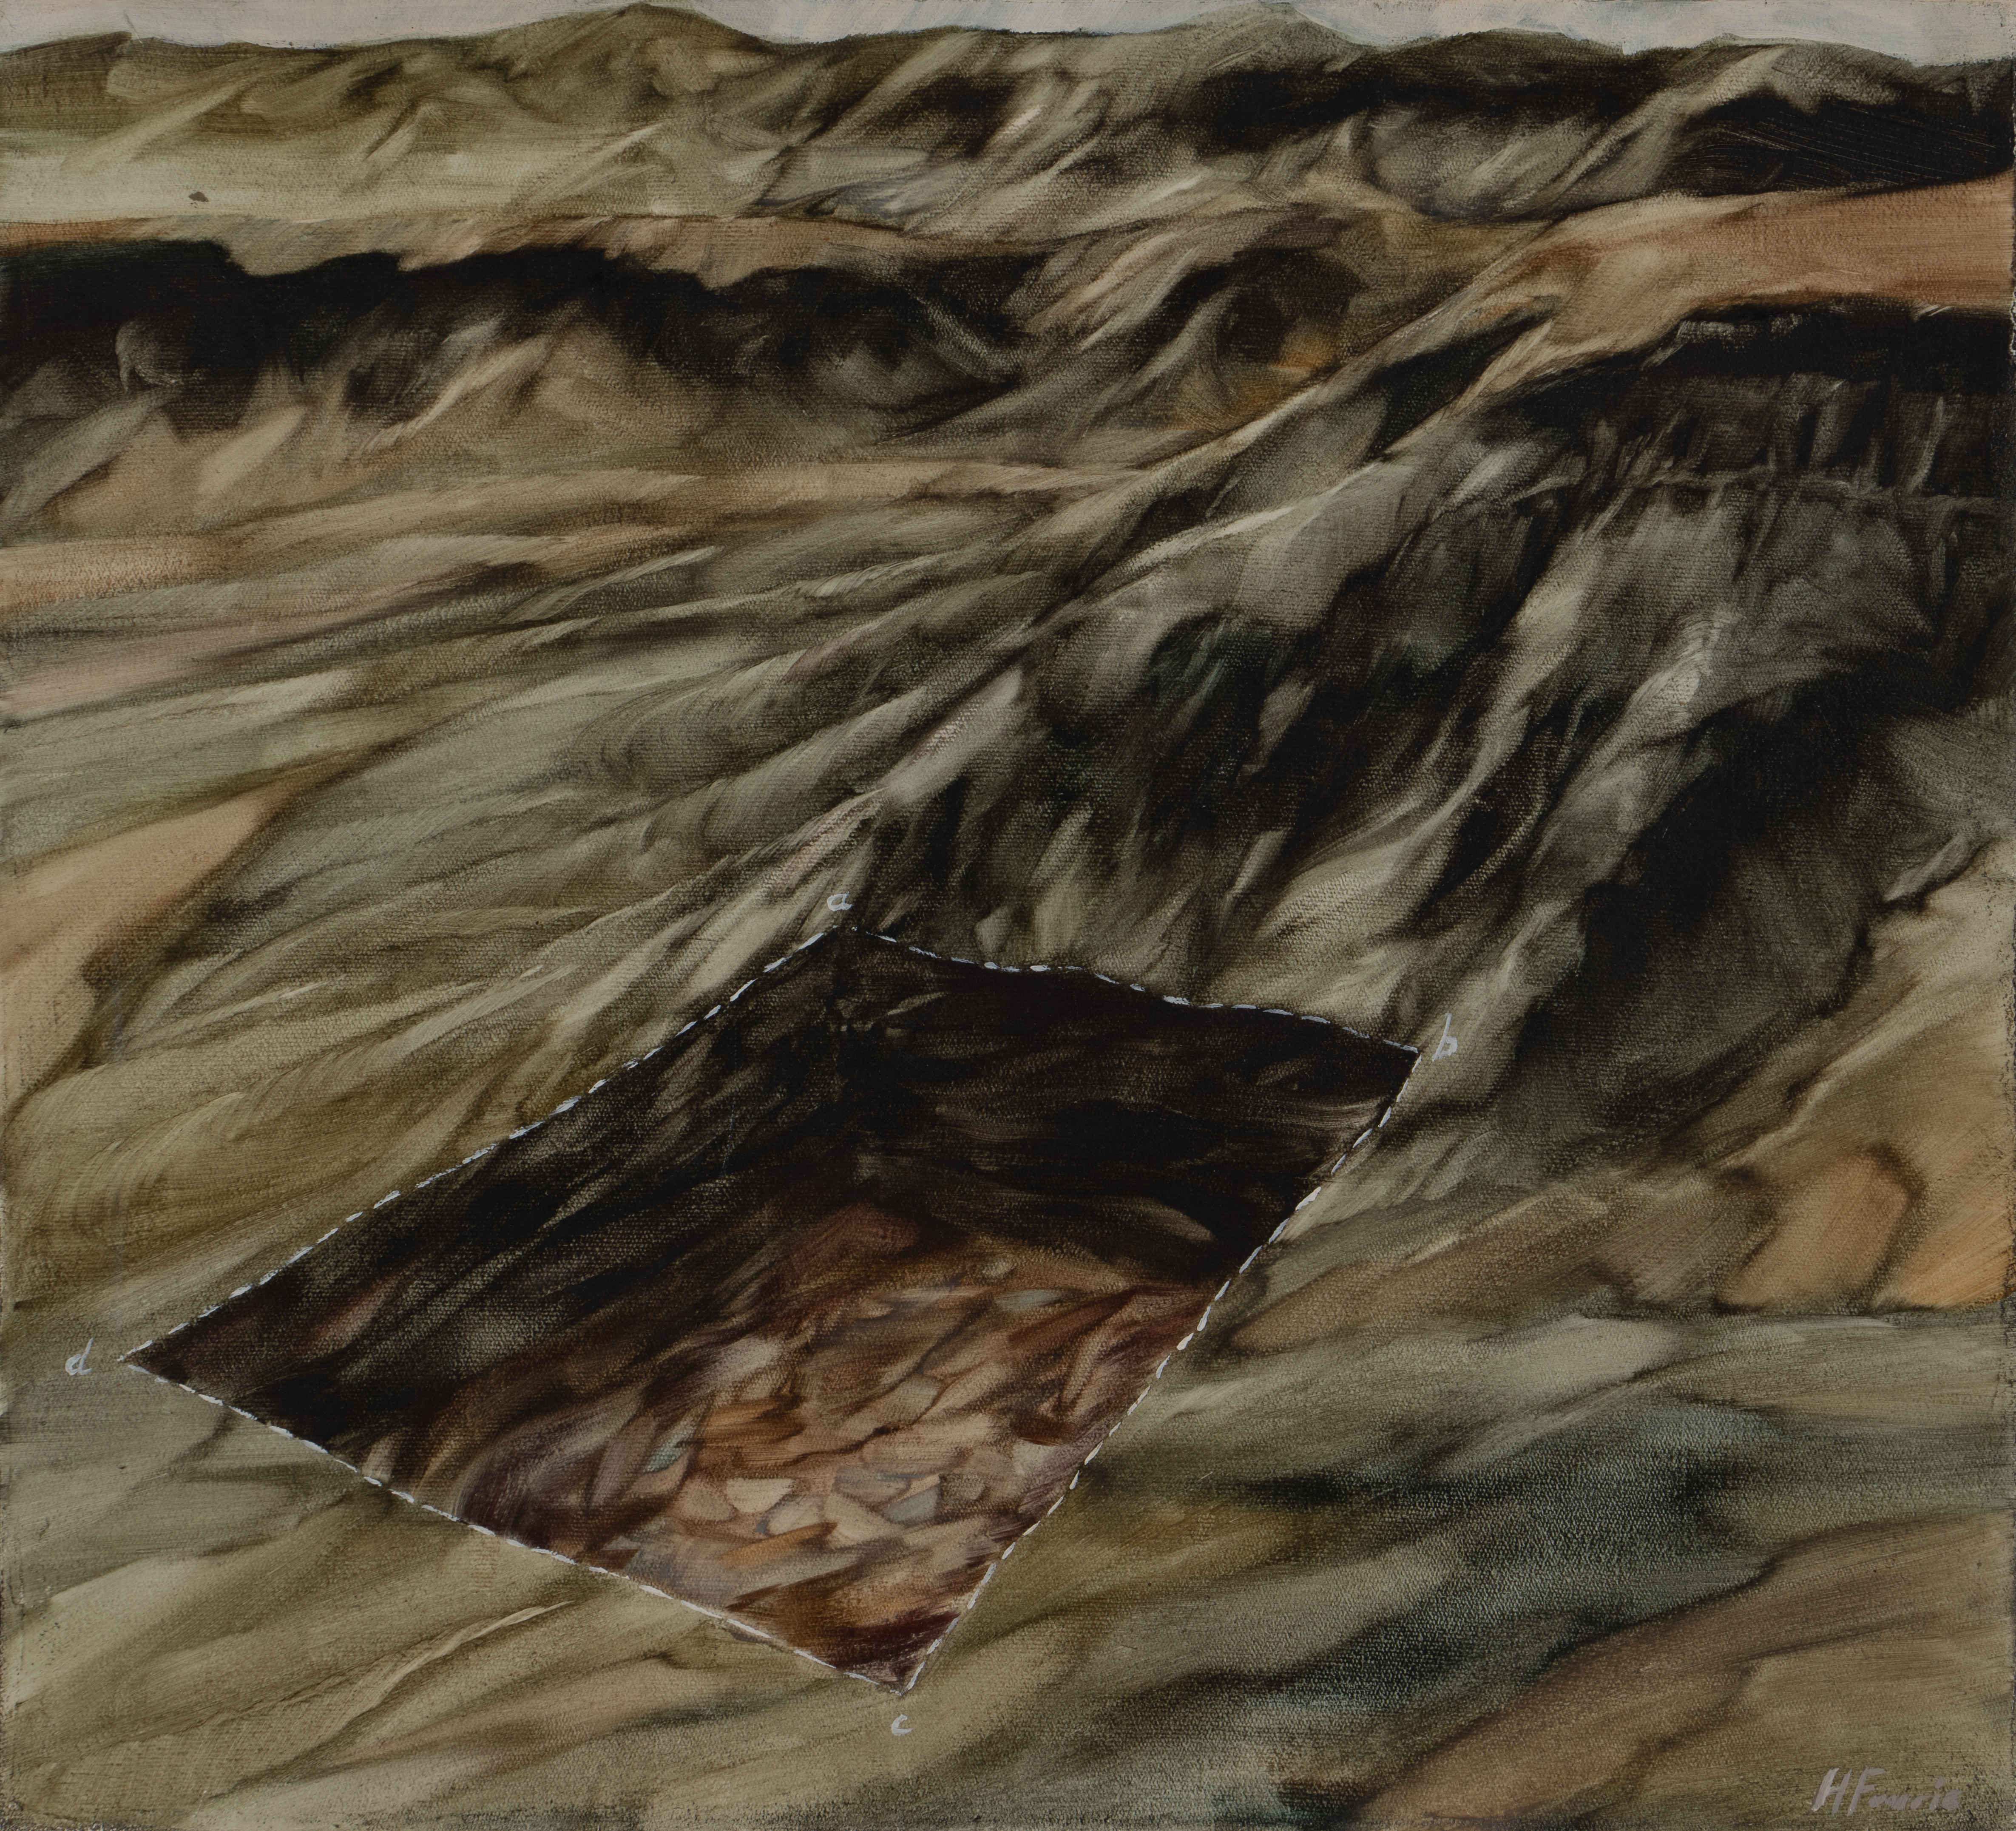 Heidi Fourie; Landscape with Pit